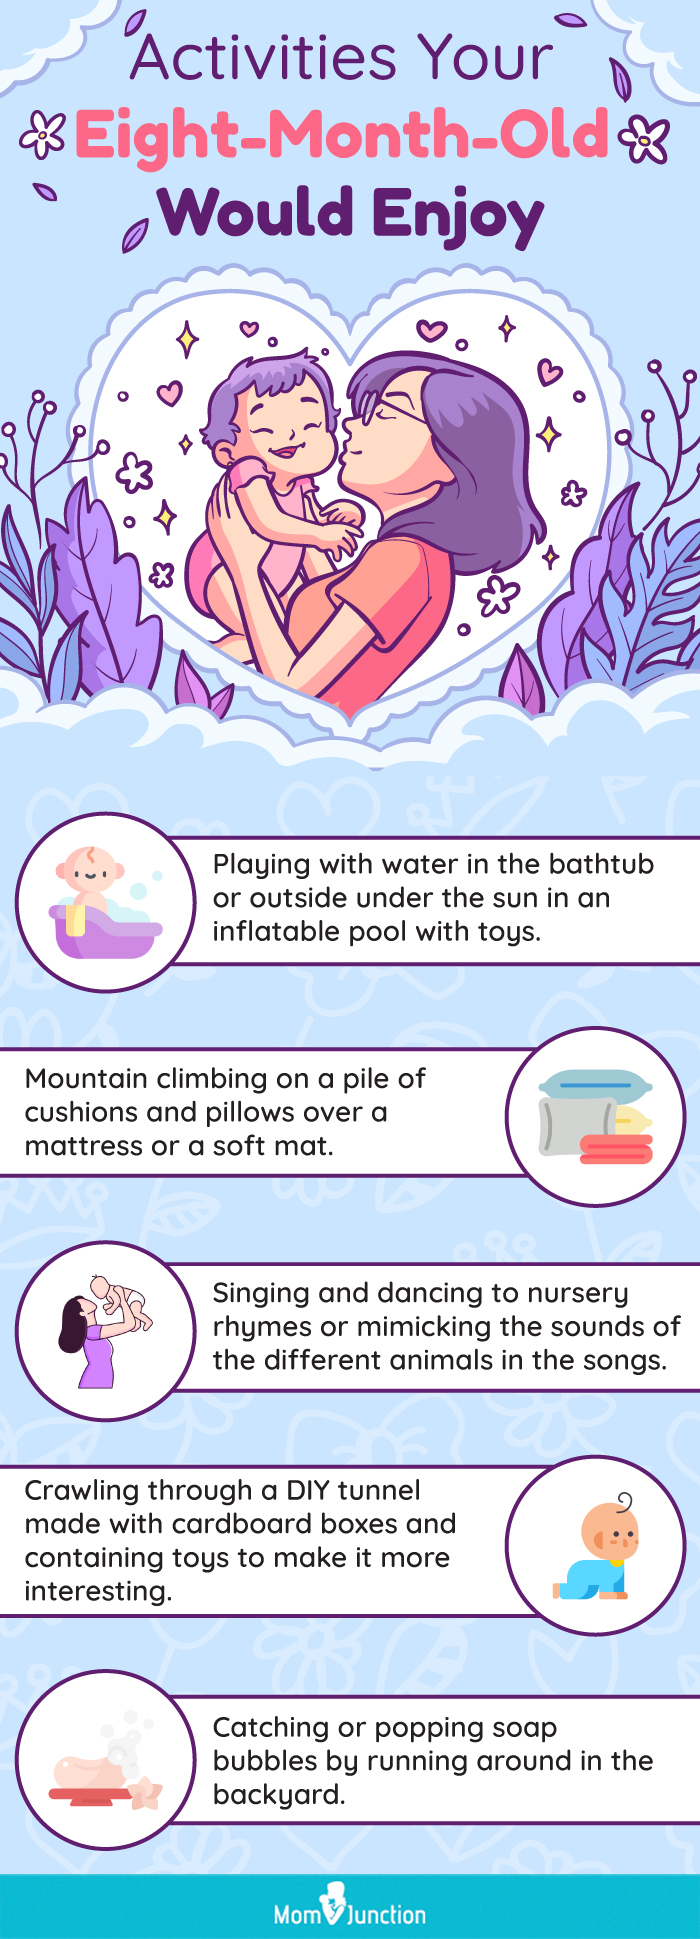 activities your eight month old would enjoy (infographic)